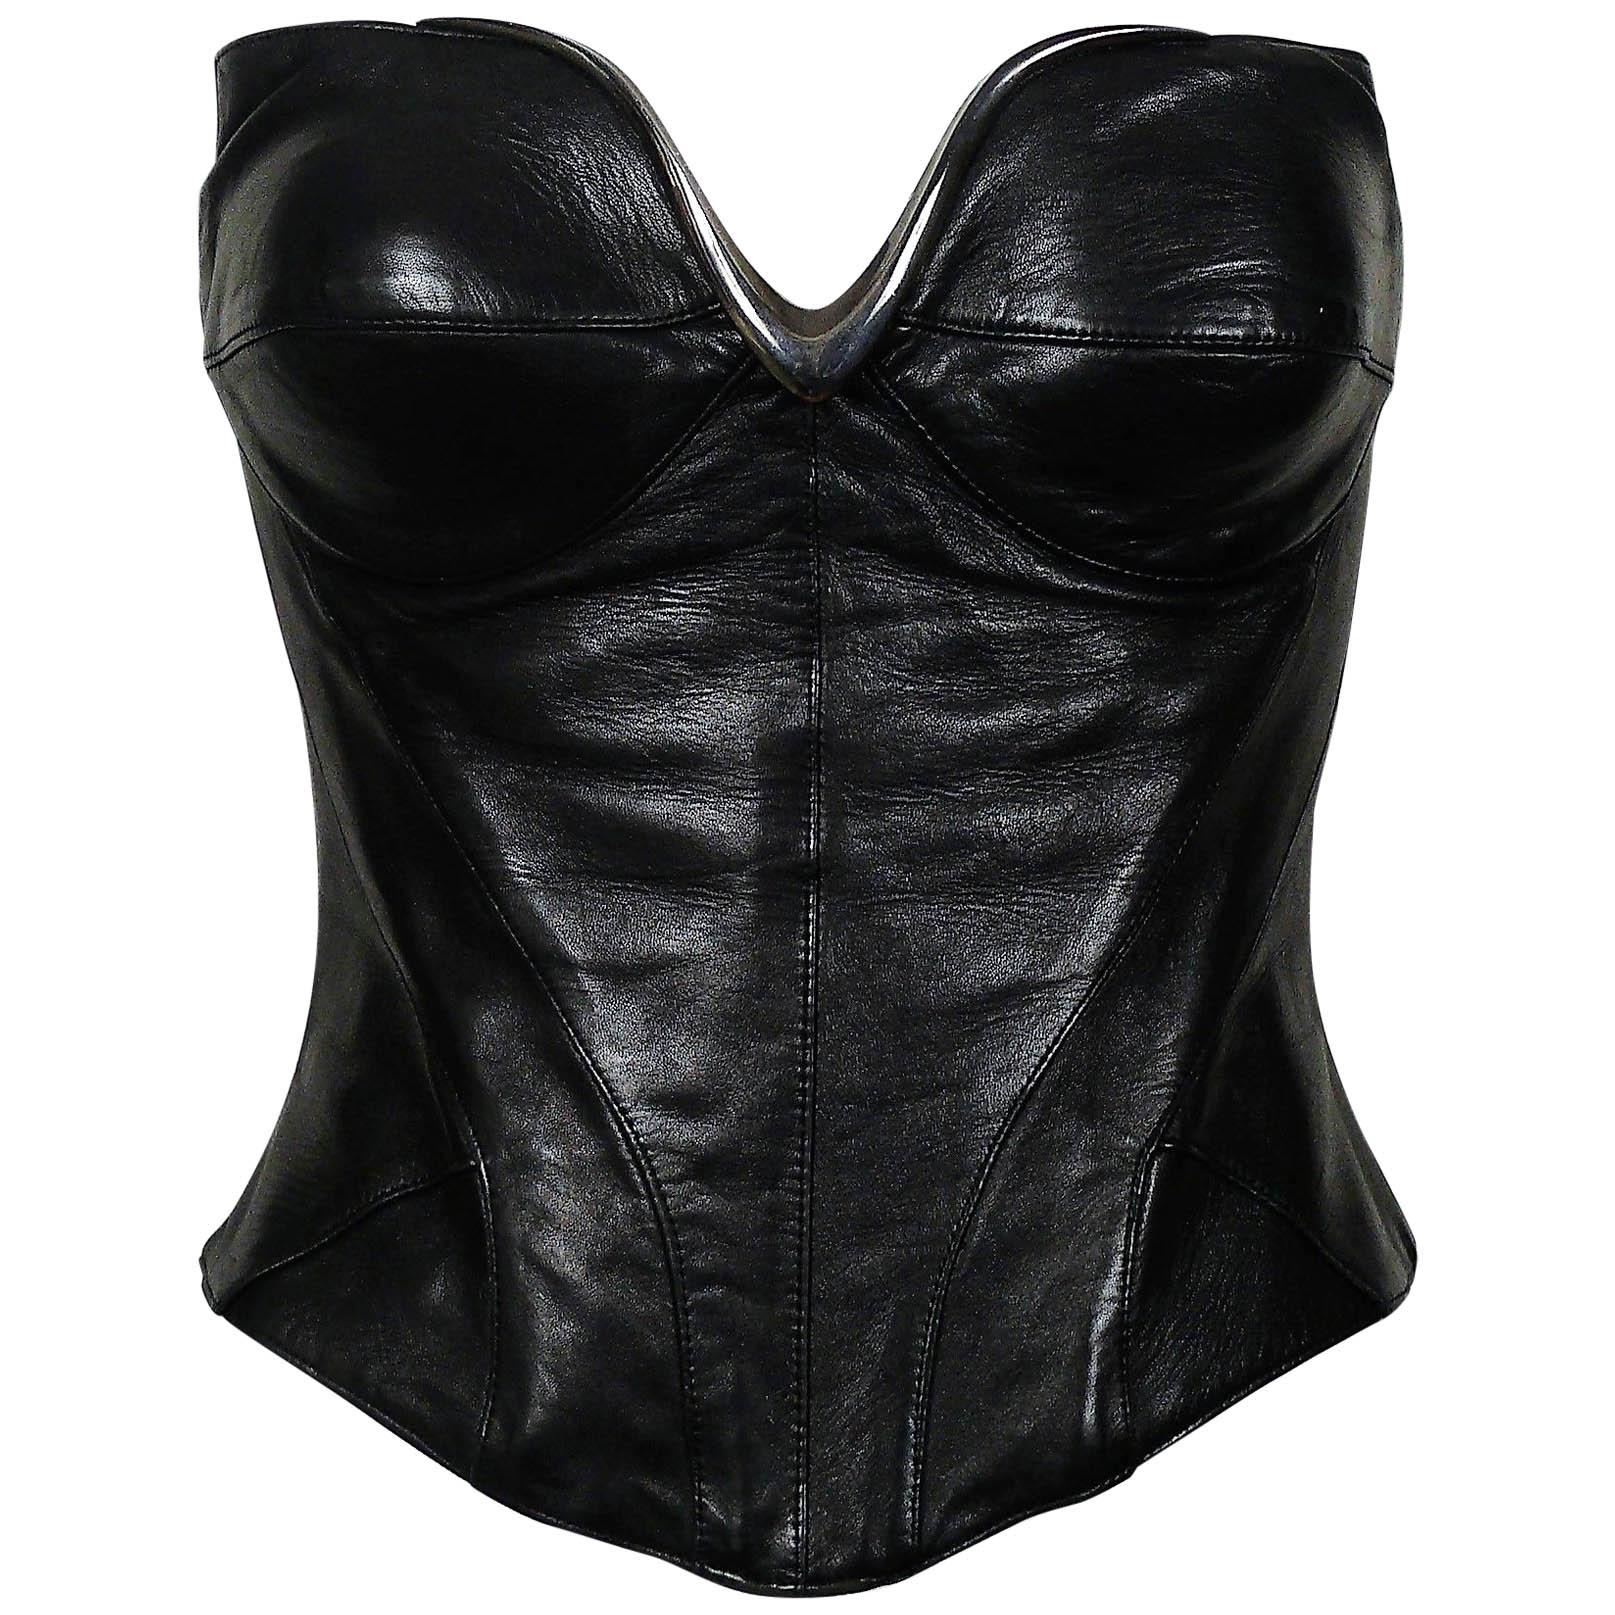 Thierry Mugler Couture Iconic Vintage Black Leather Bustier Corset